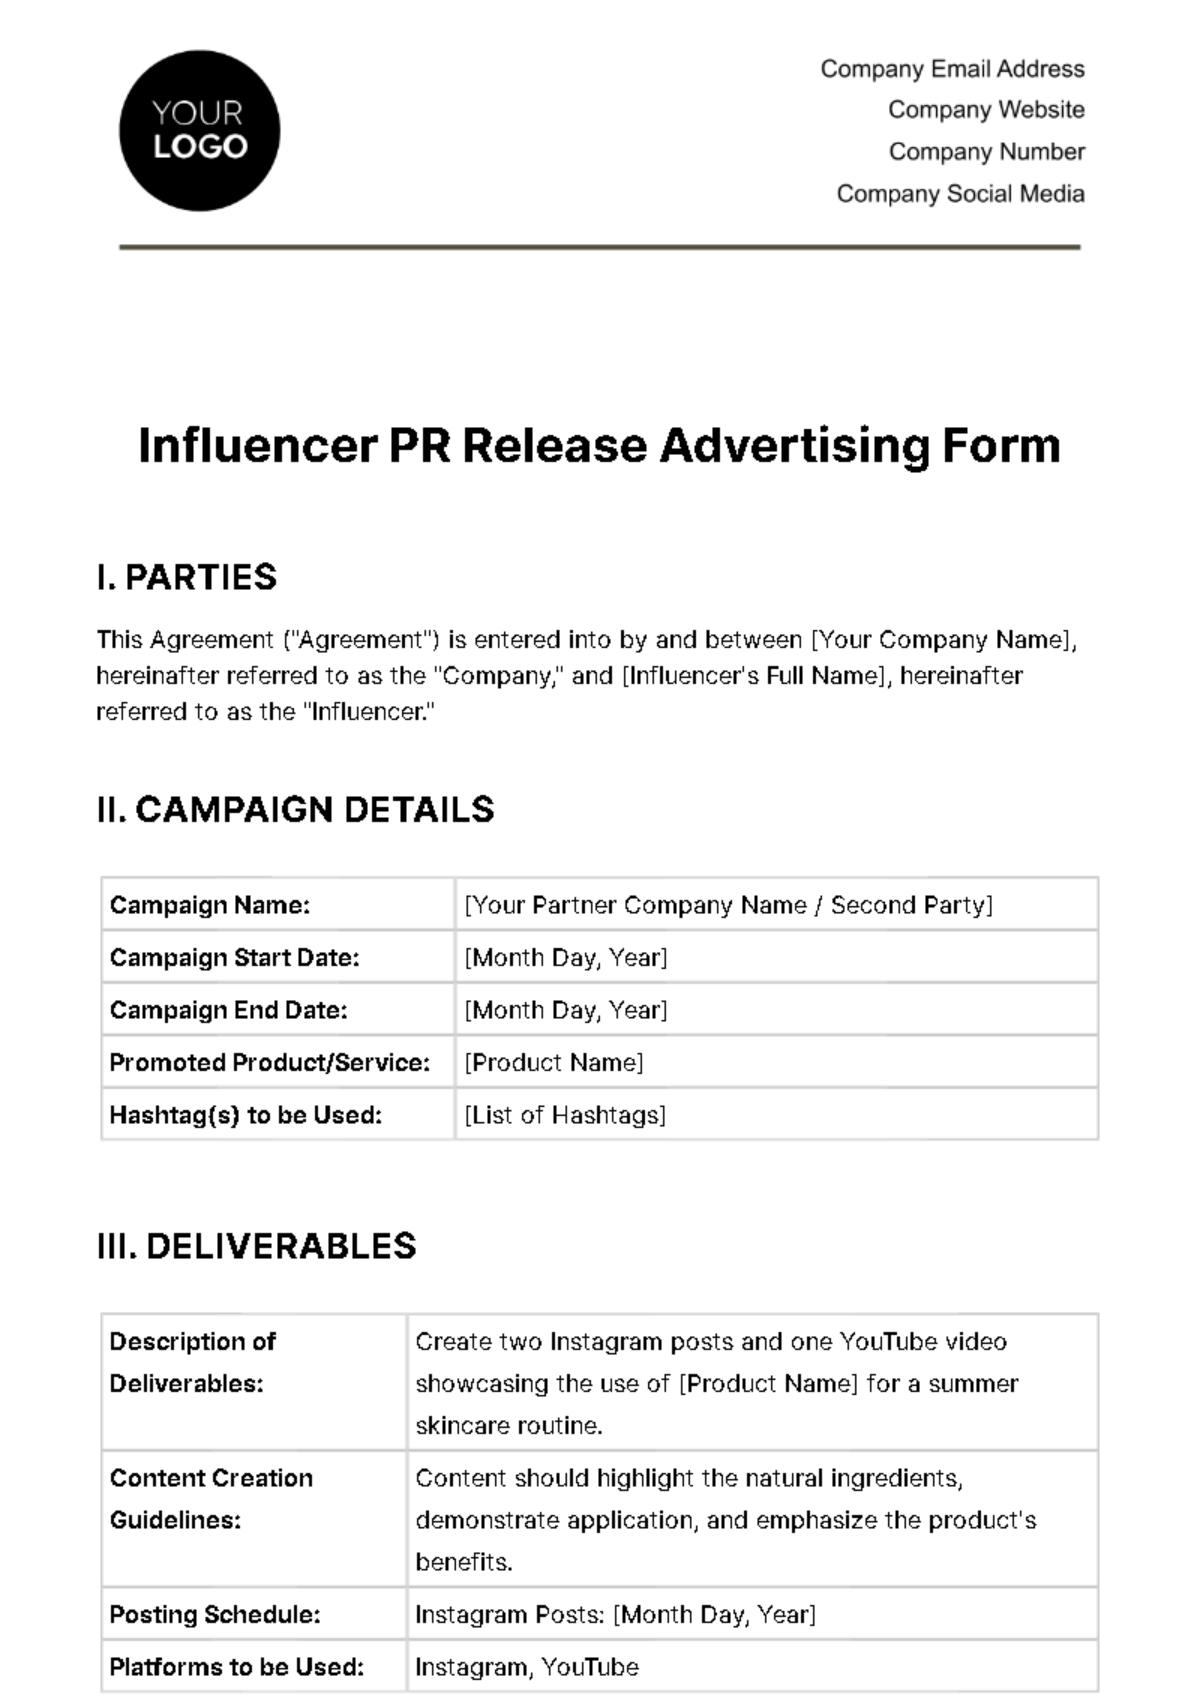 Influencer PR Release Advertising Form Template 